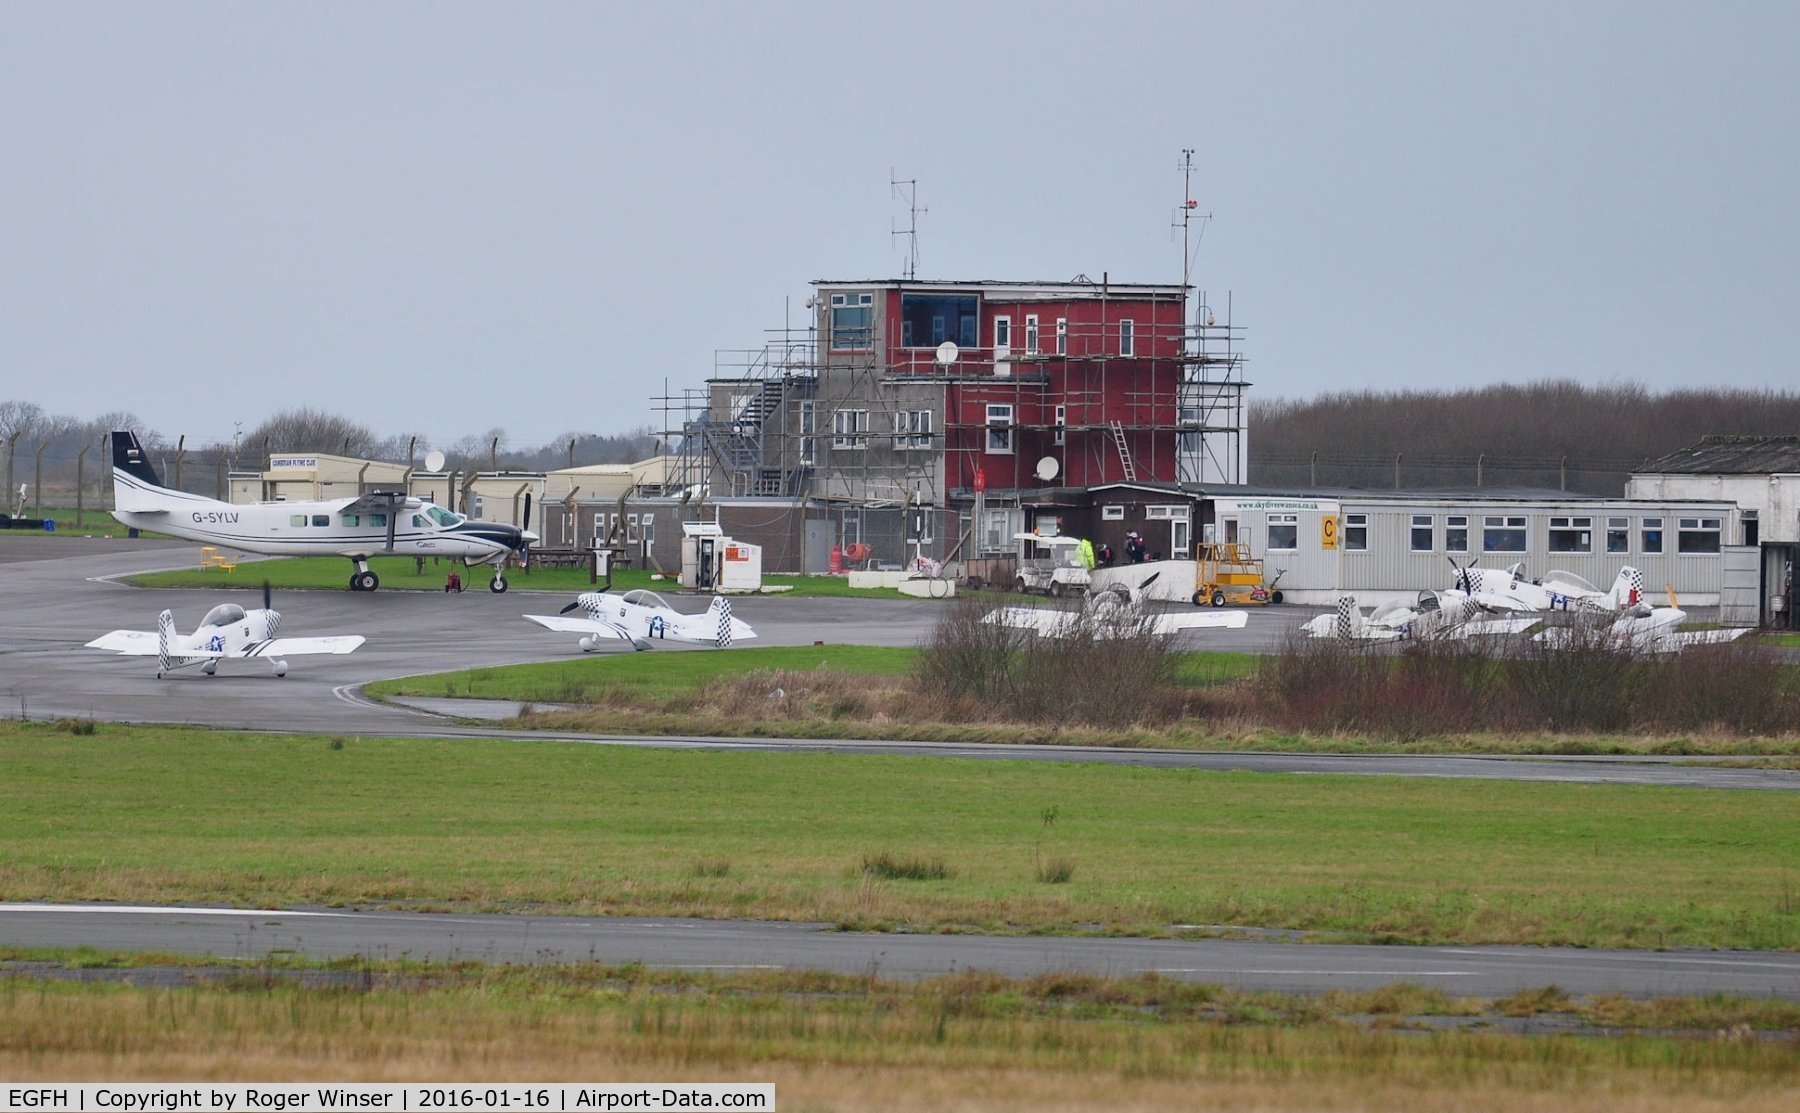 Swansea Airport, Swansea, Wales United Kingdom (EGFH) - Main terminal building/control tower being renovated.